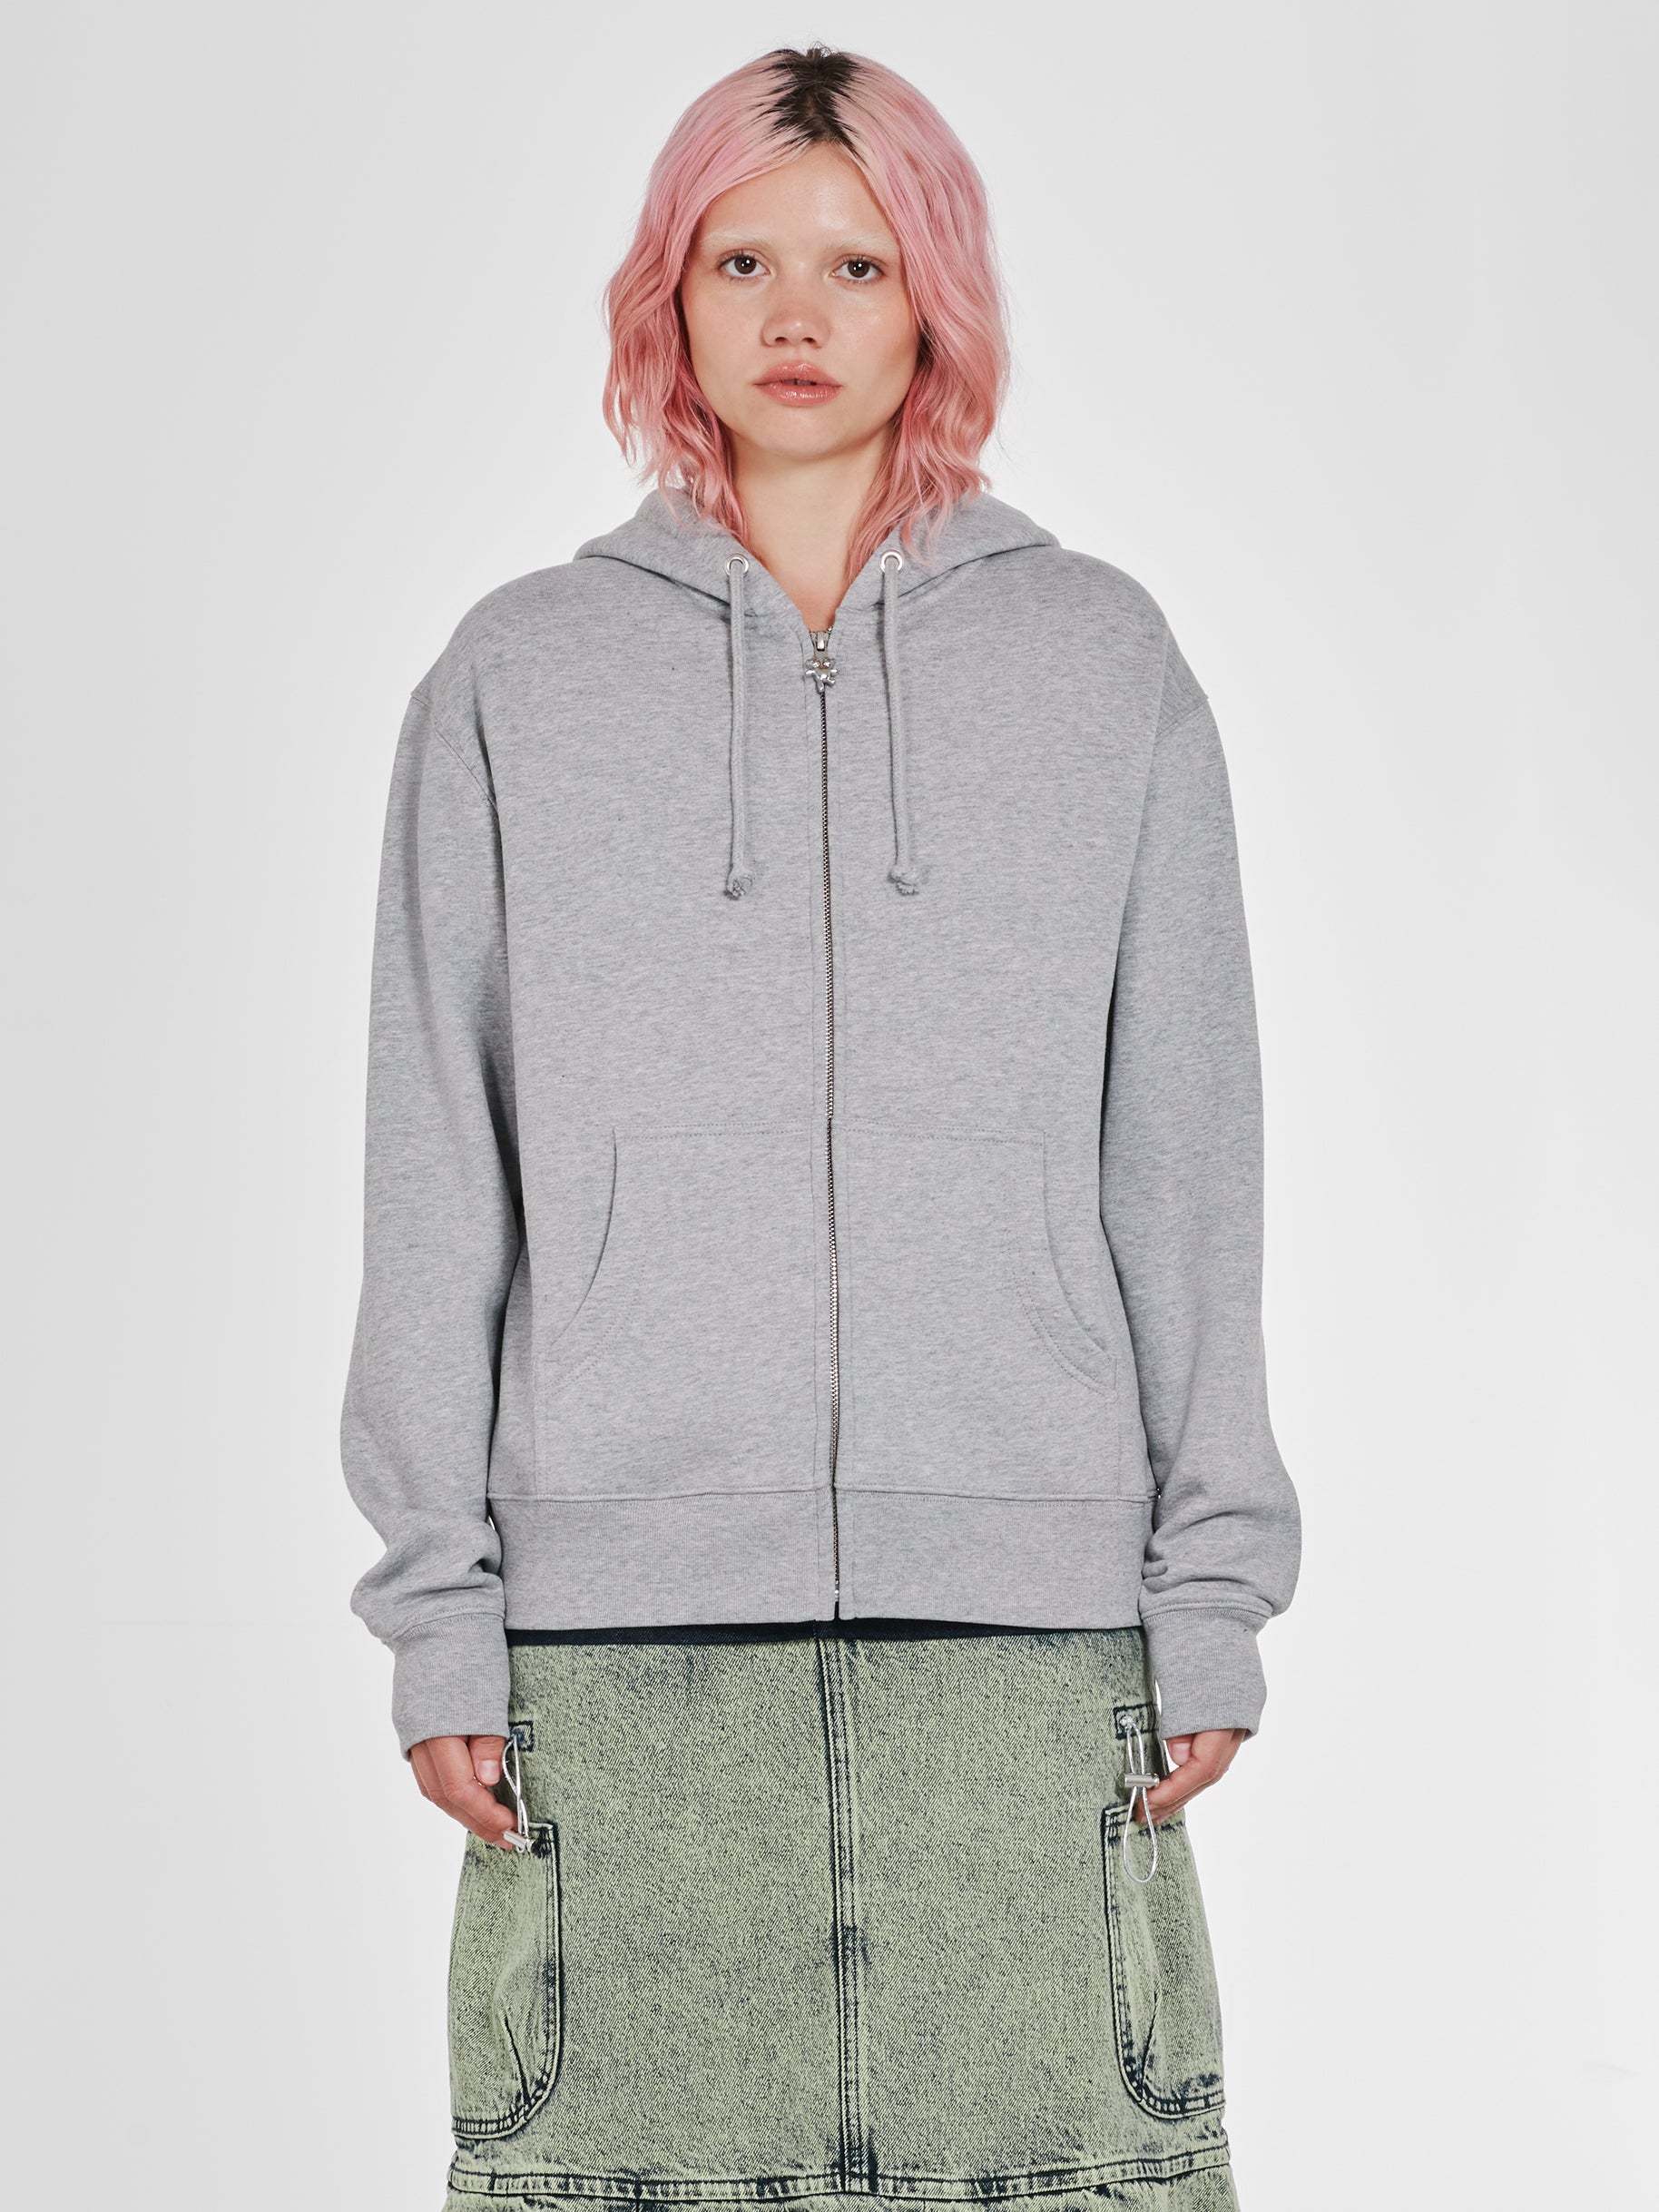 Heaven By Marc Jacobs - Women’s Donnie’s All-In-One Zip-Up - (Grey) view 1